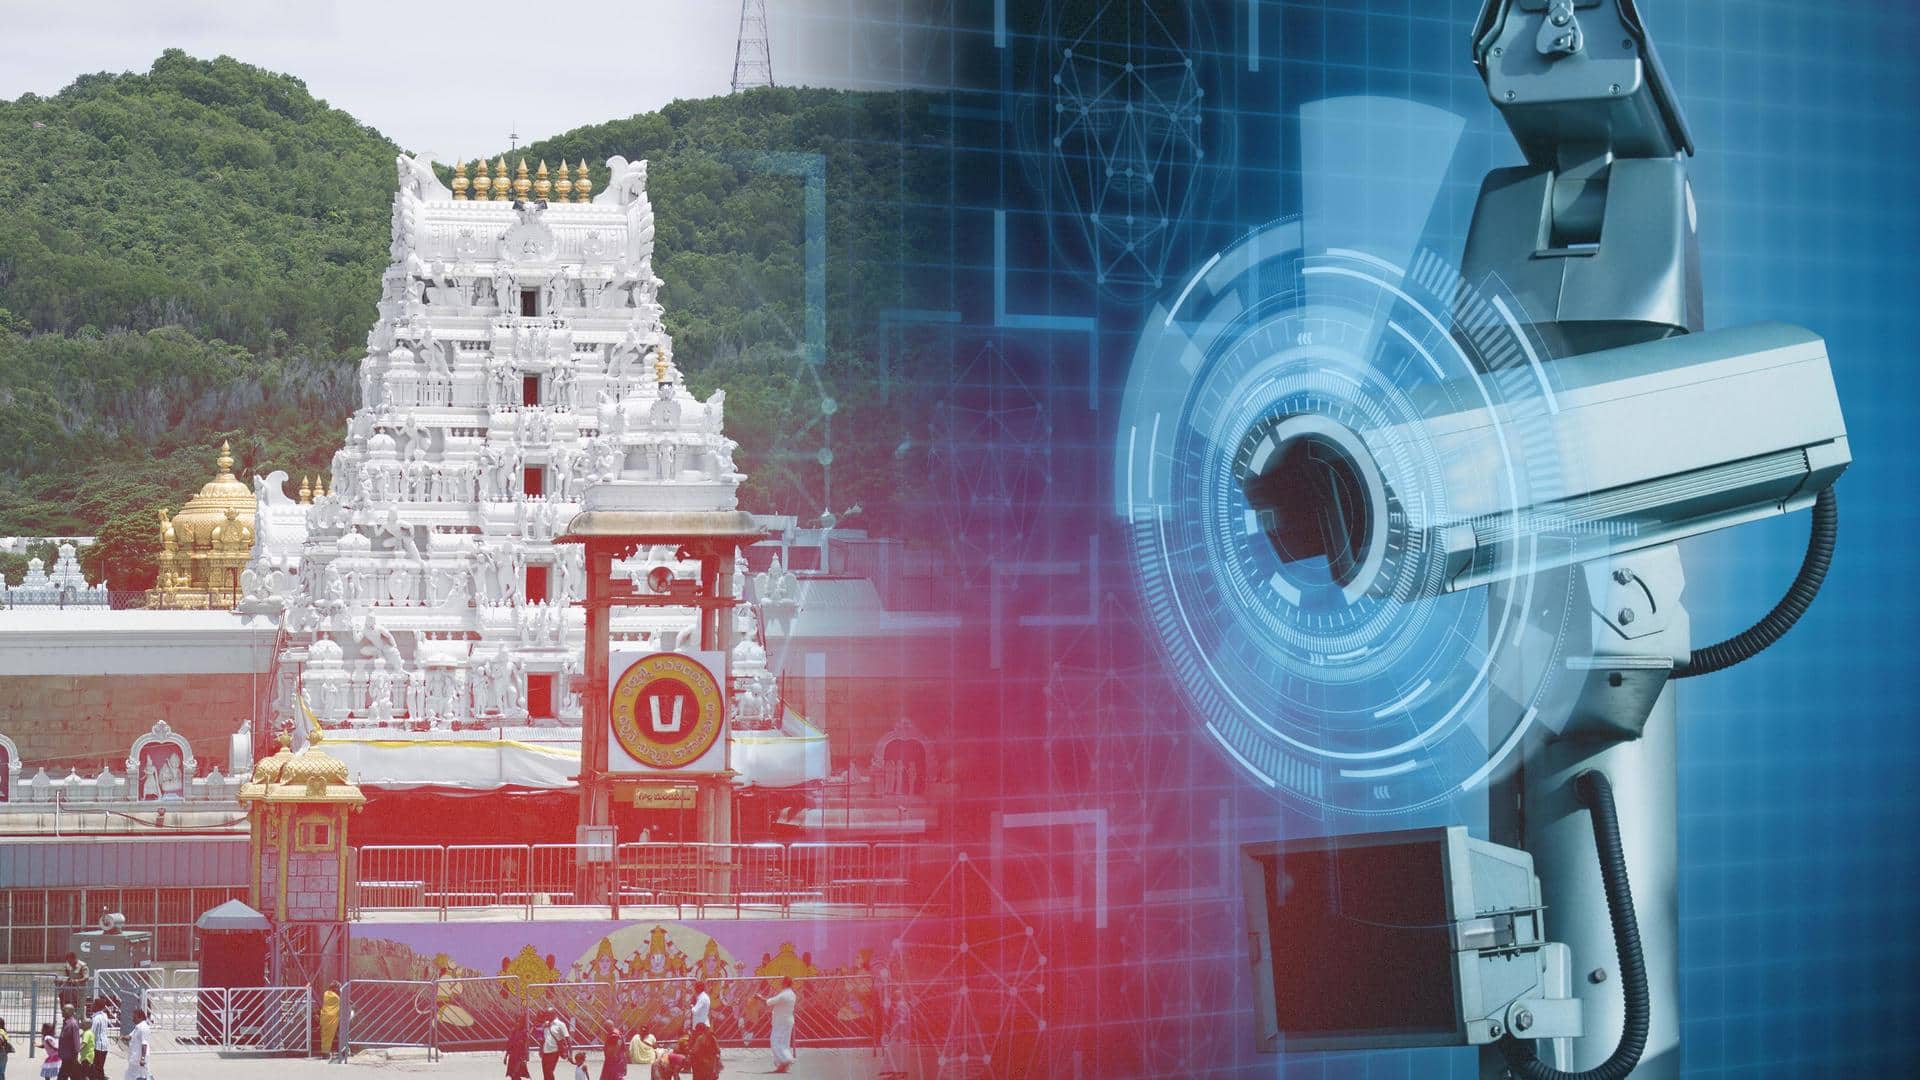 Tirupati Temple gets facial recognition system: How will it work